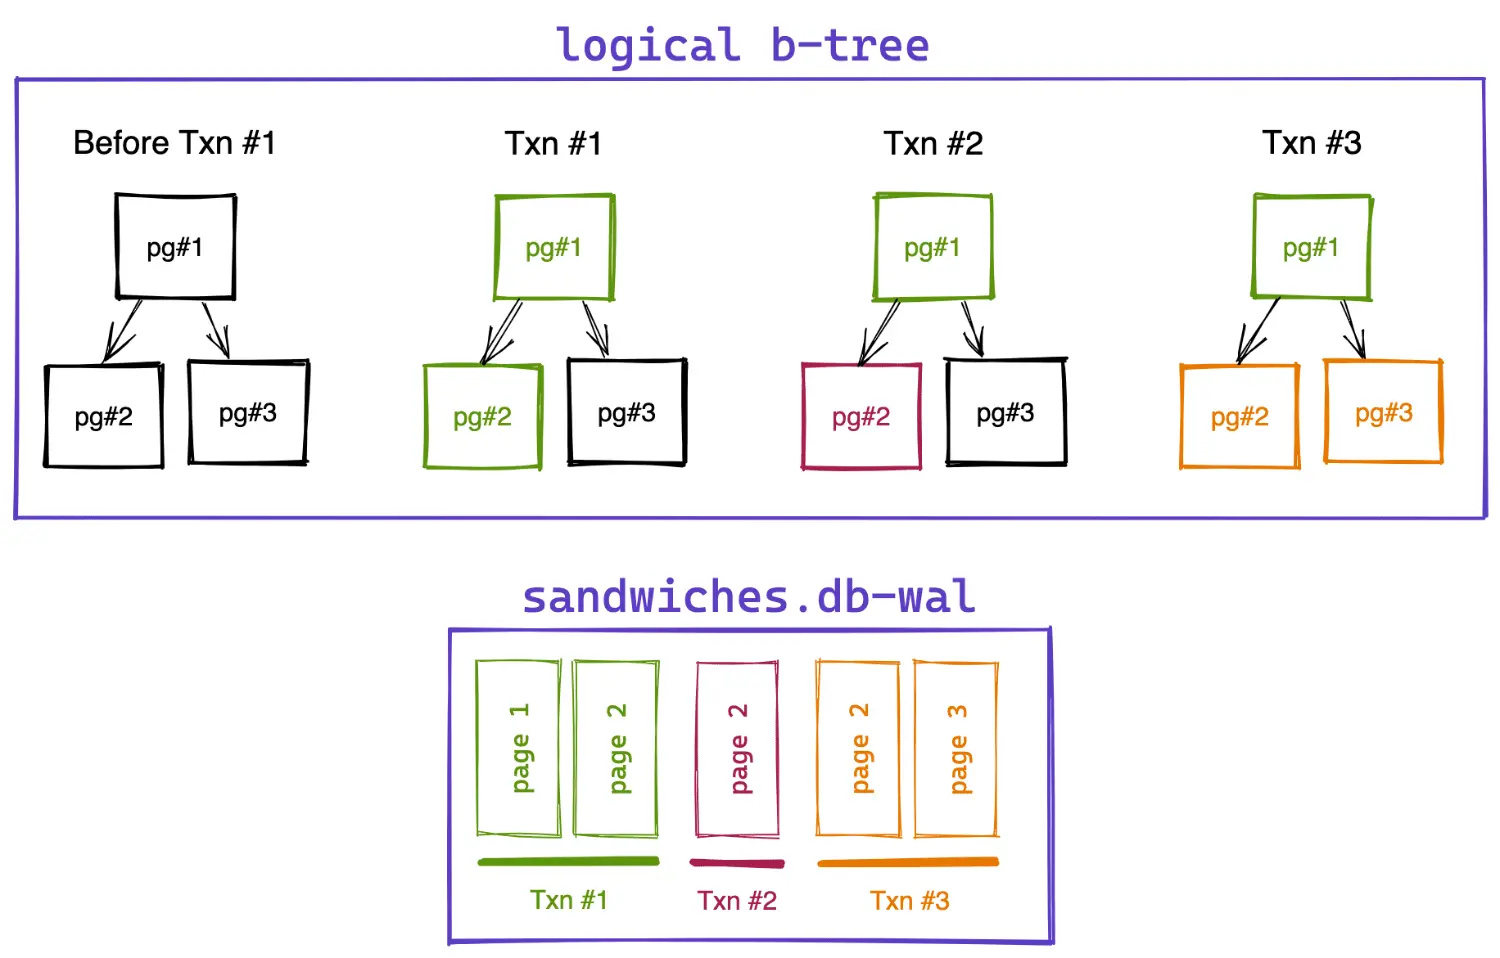 Several states of the b-tree as represented in transactions starting at different points of time.